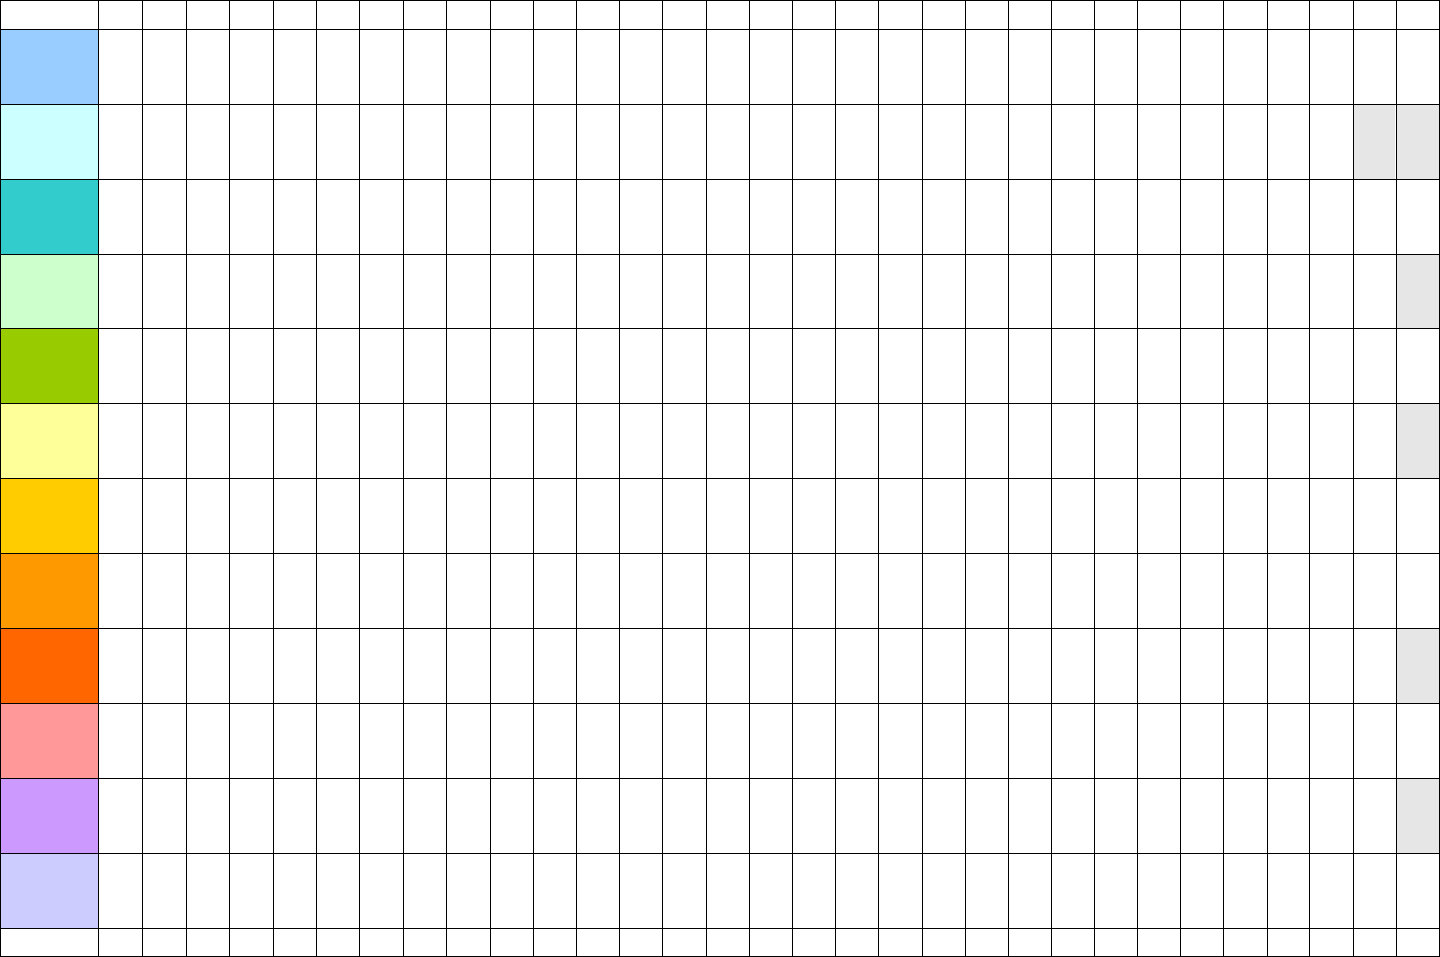 Blank Calendar Template In Word And Pdf Formats